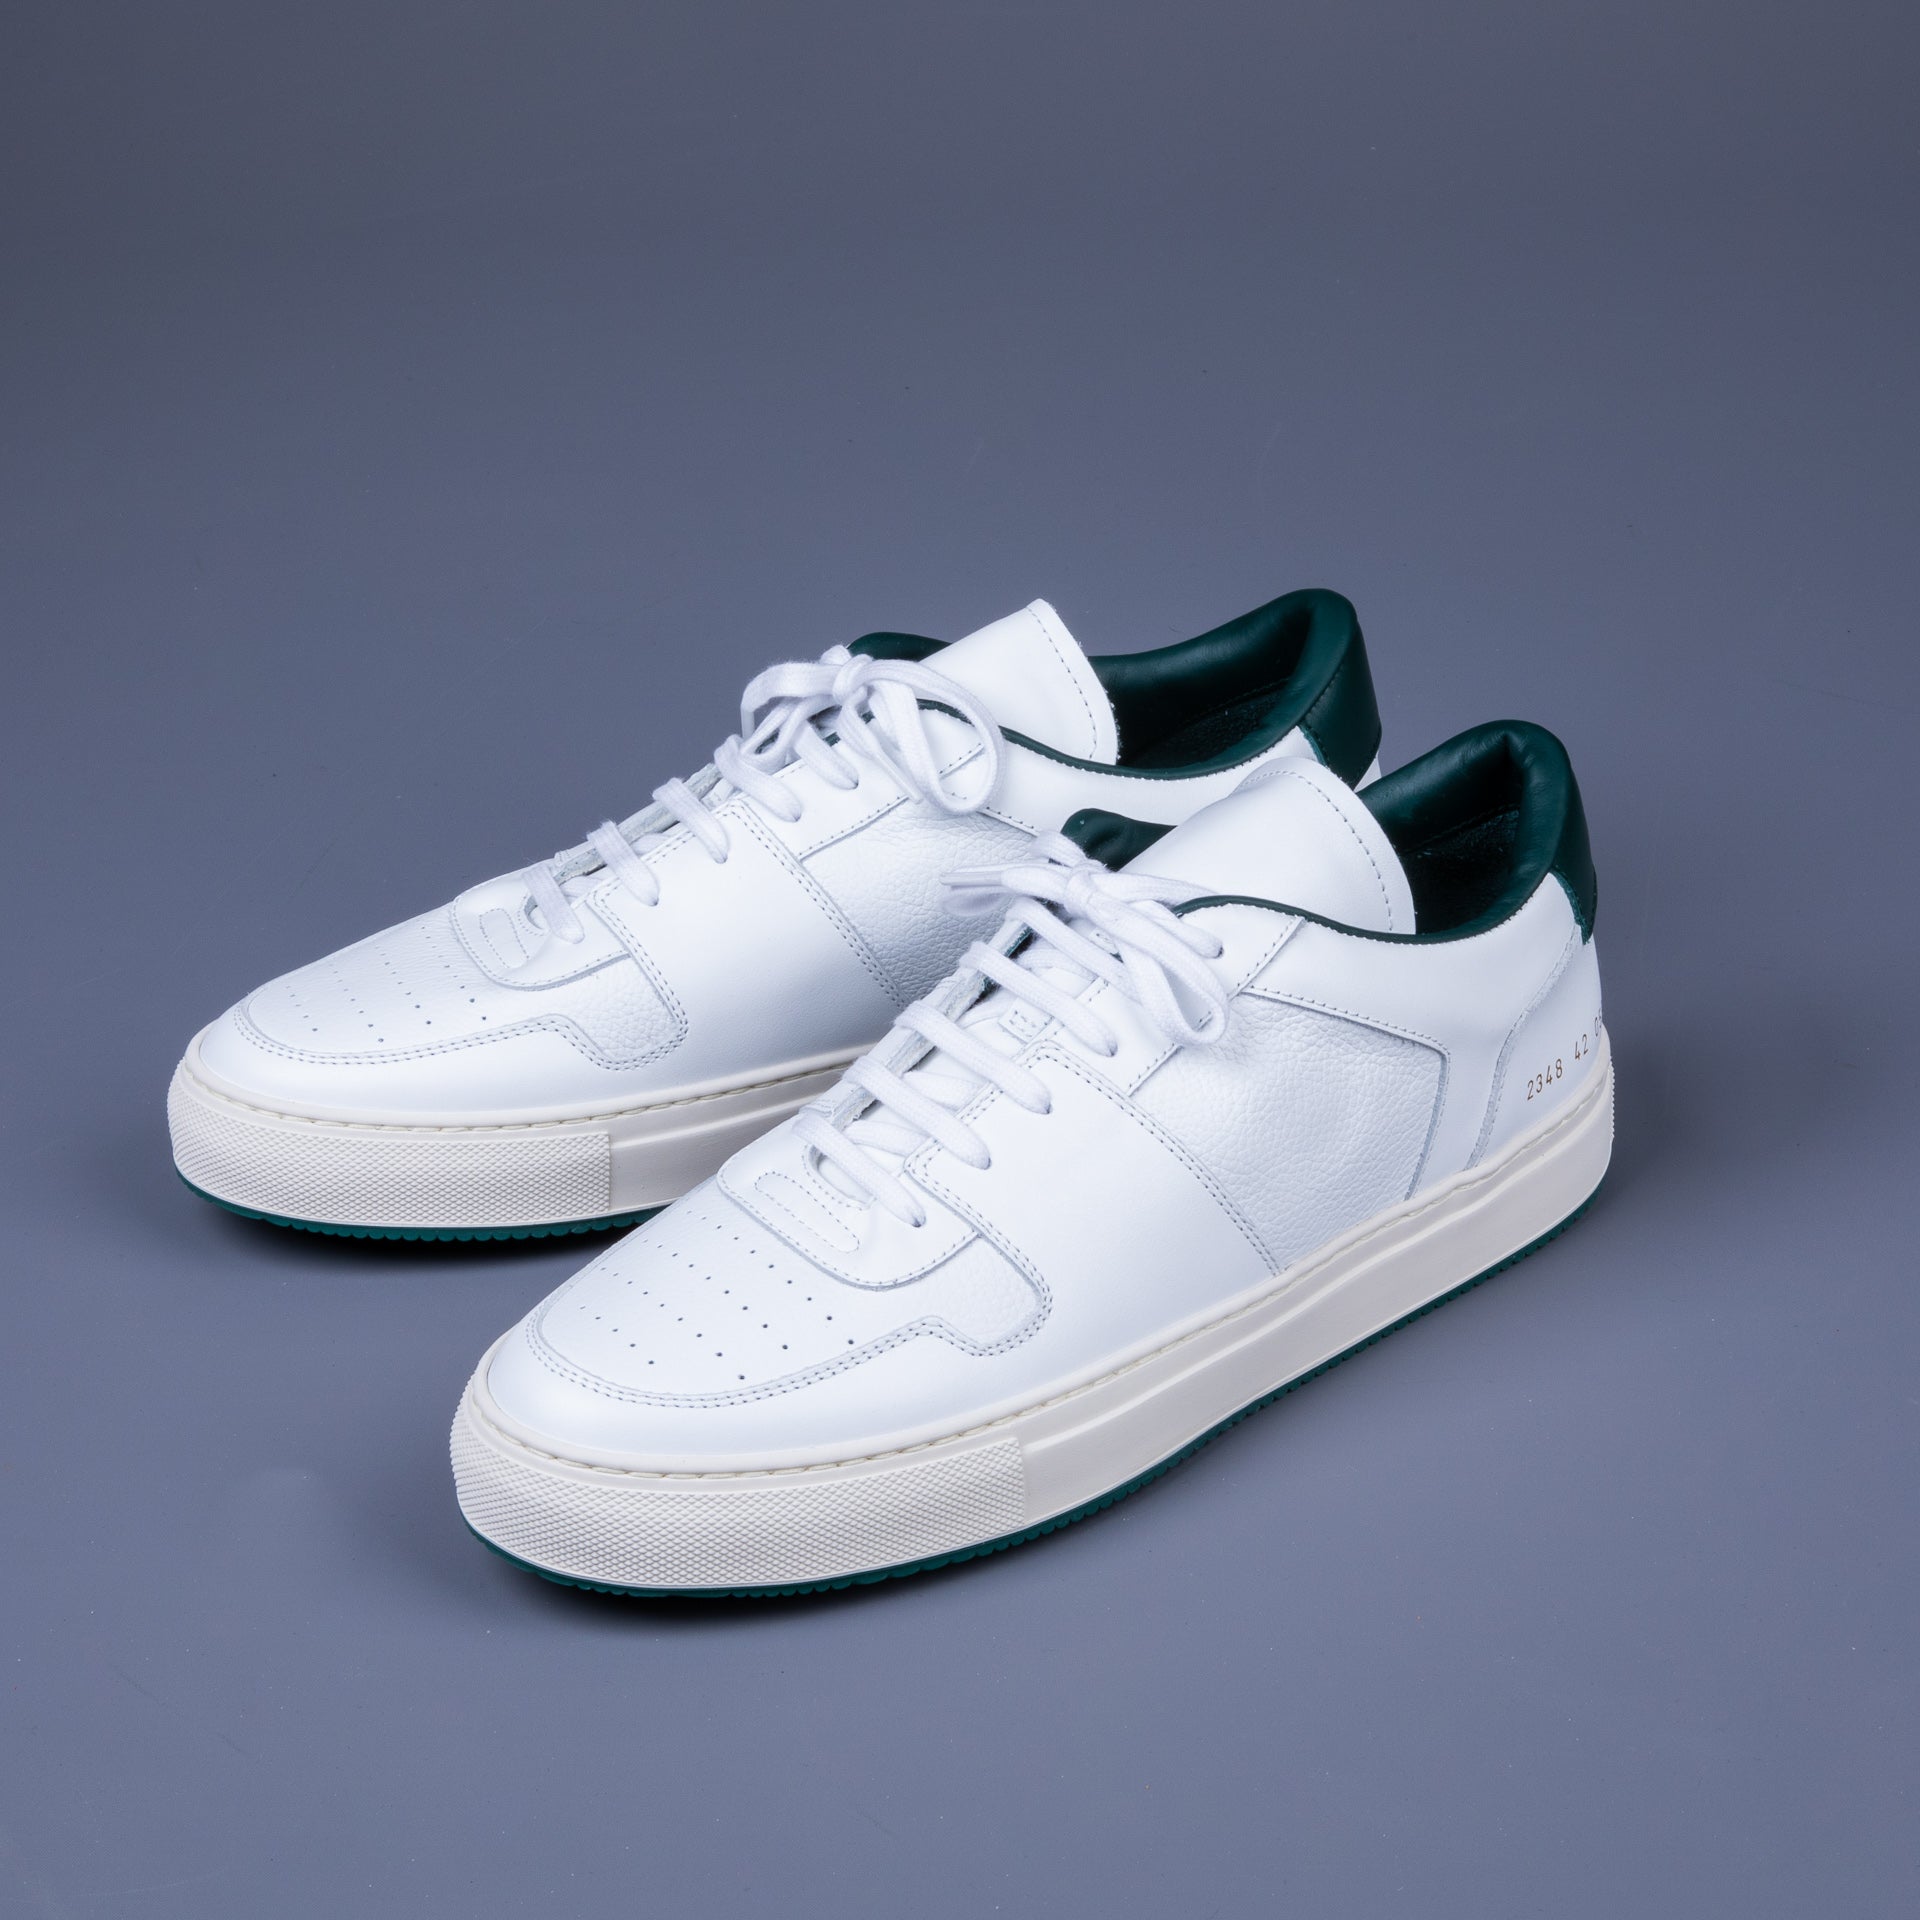 Common Projects Decades Low White/Green